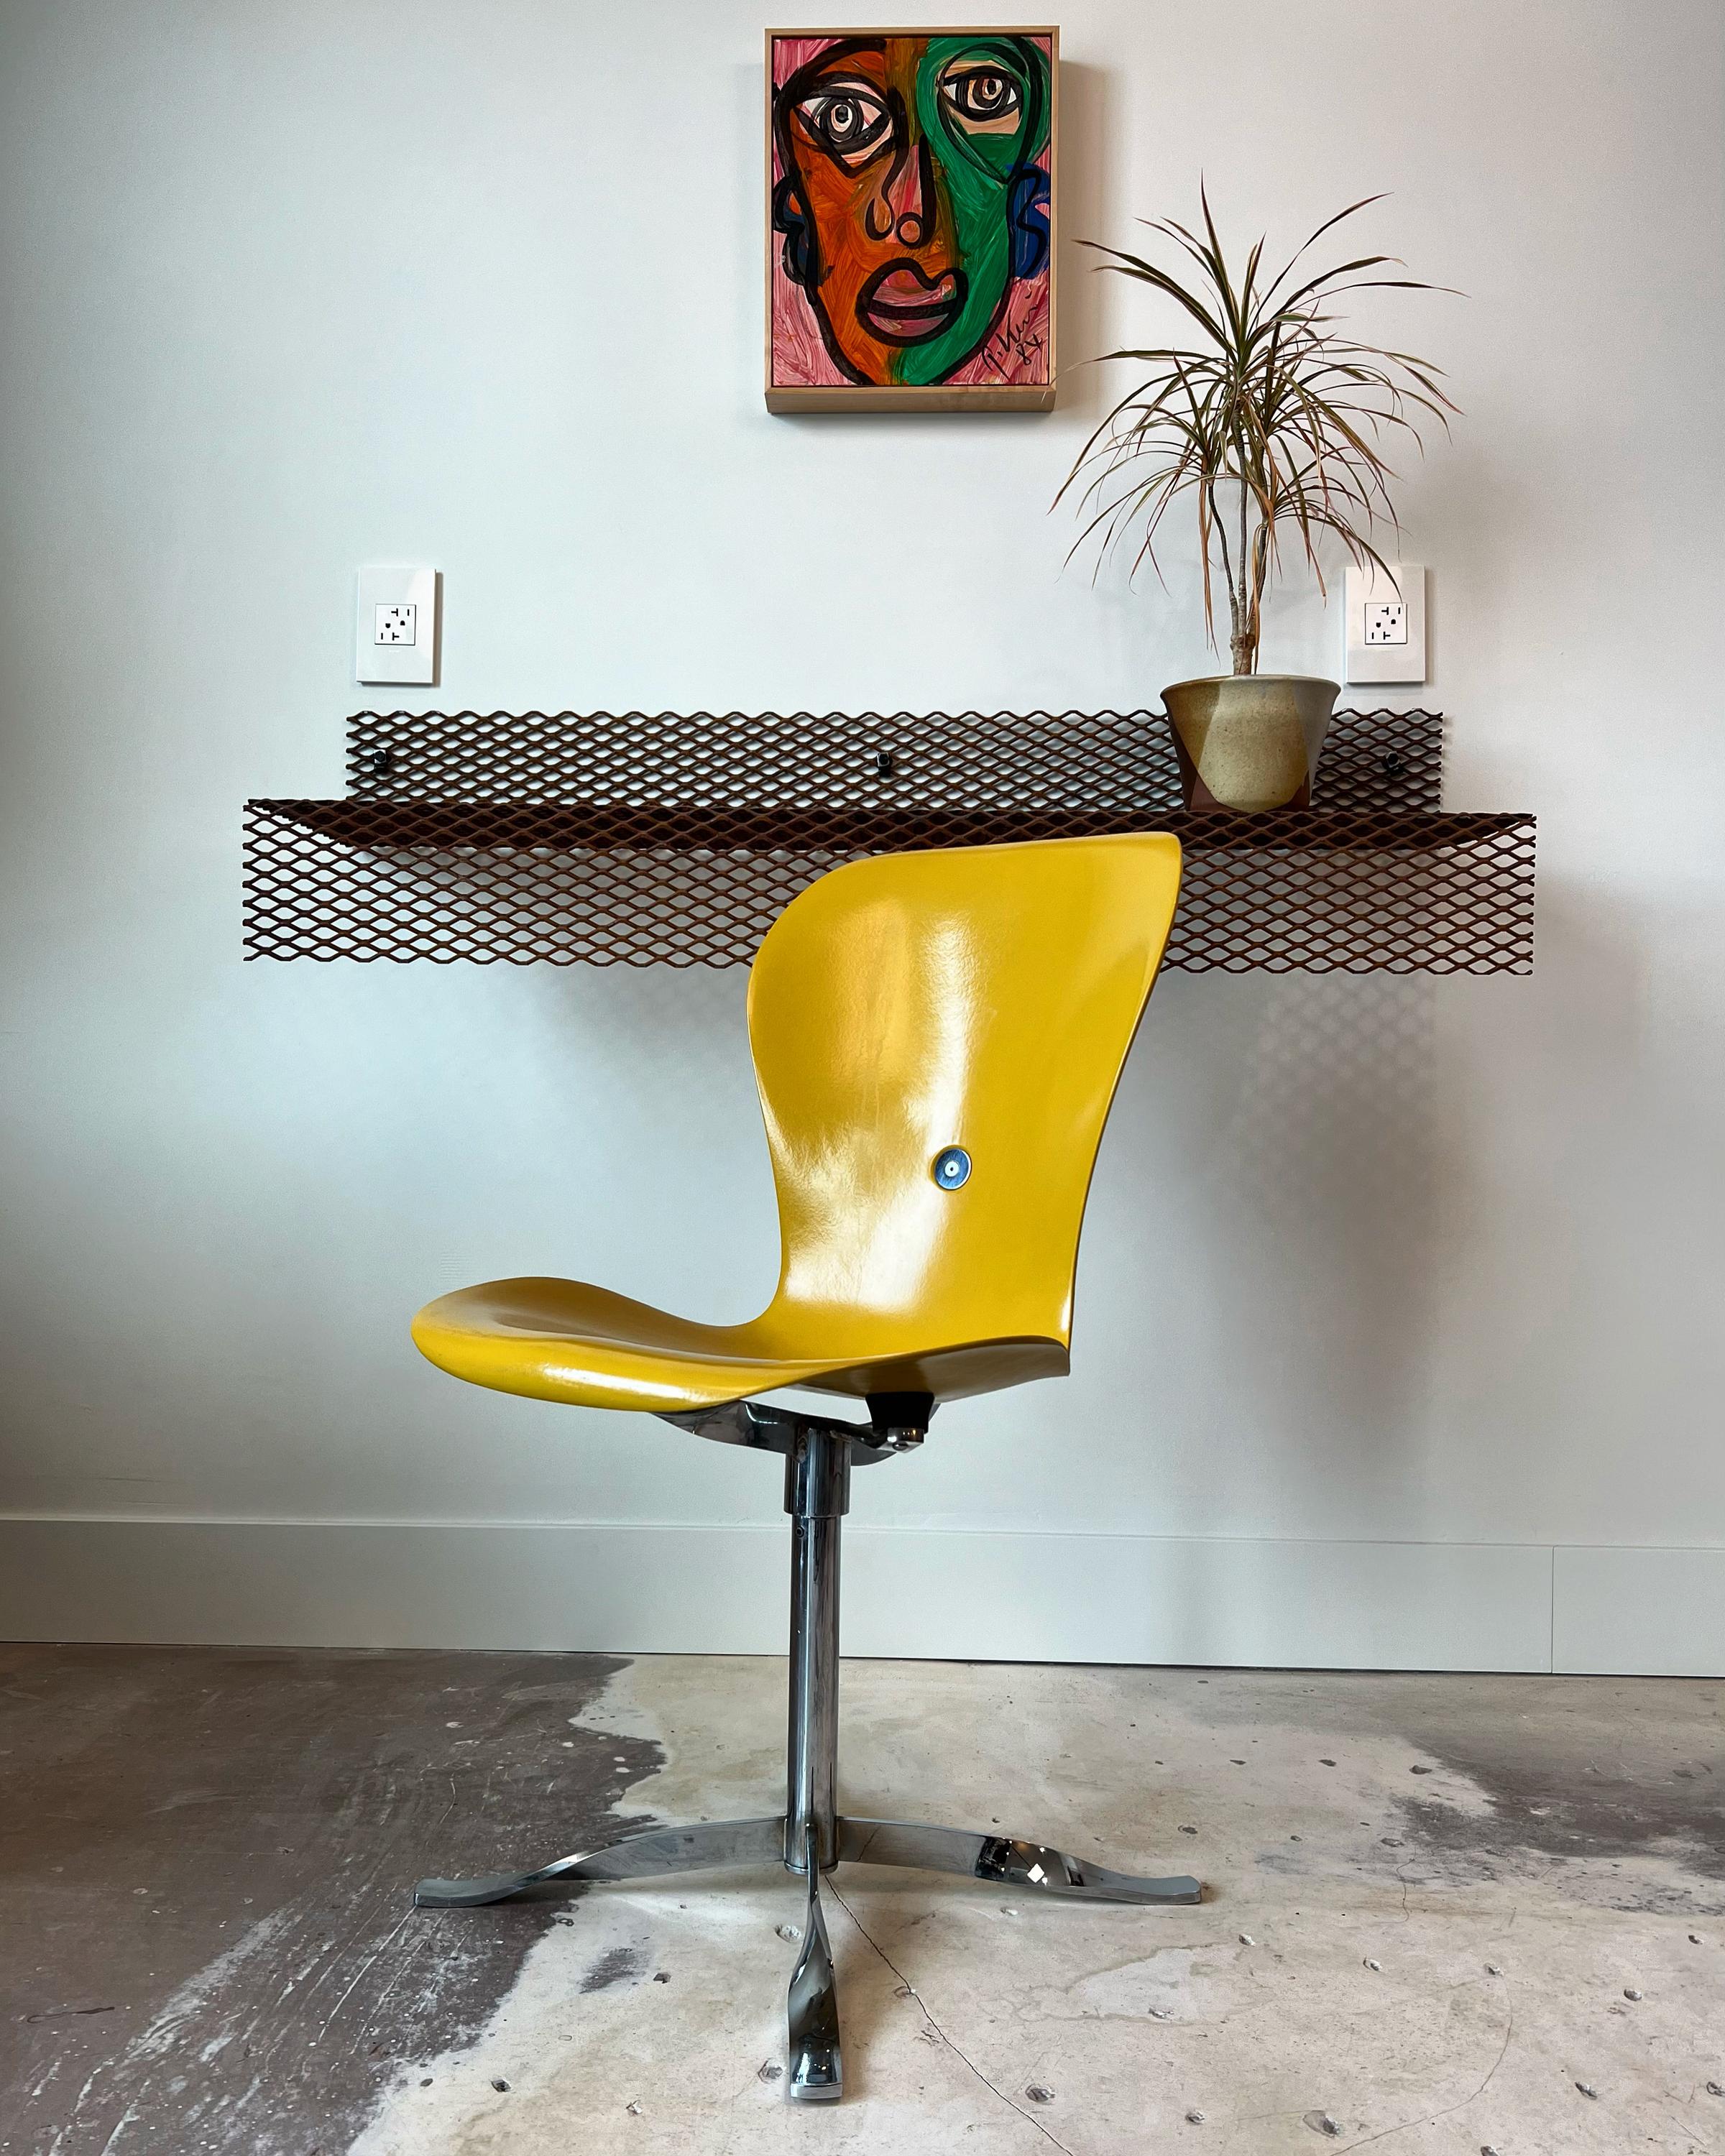 Set of 6 Ion chairs by Gideon Kramer for American Desk Co. Originally designed for the 1962 Worlds Fair in Seattle. Extremely well built and in great condition. A few small scuffs and spots of stressed fiberglass from normal wear and use. The chrome